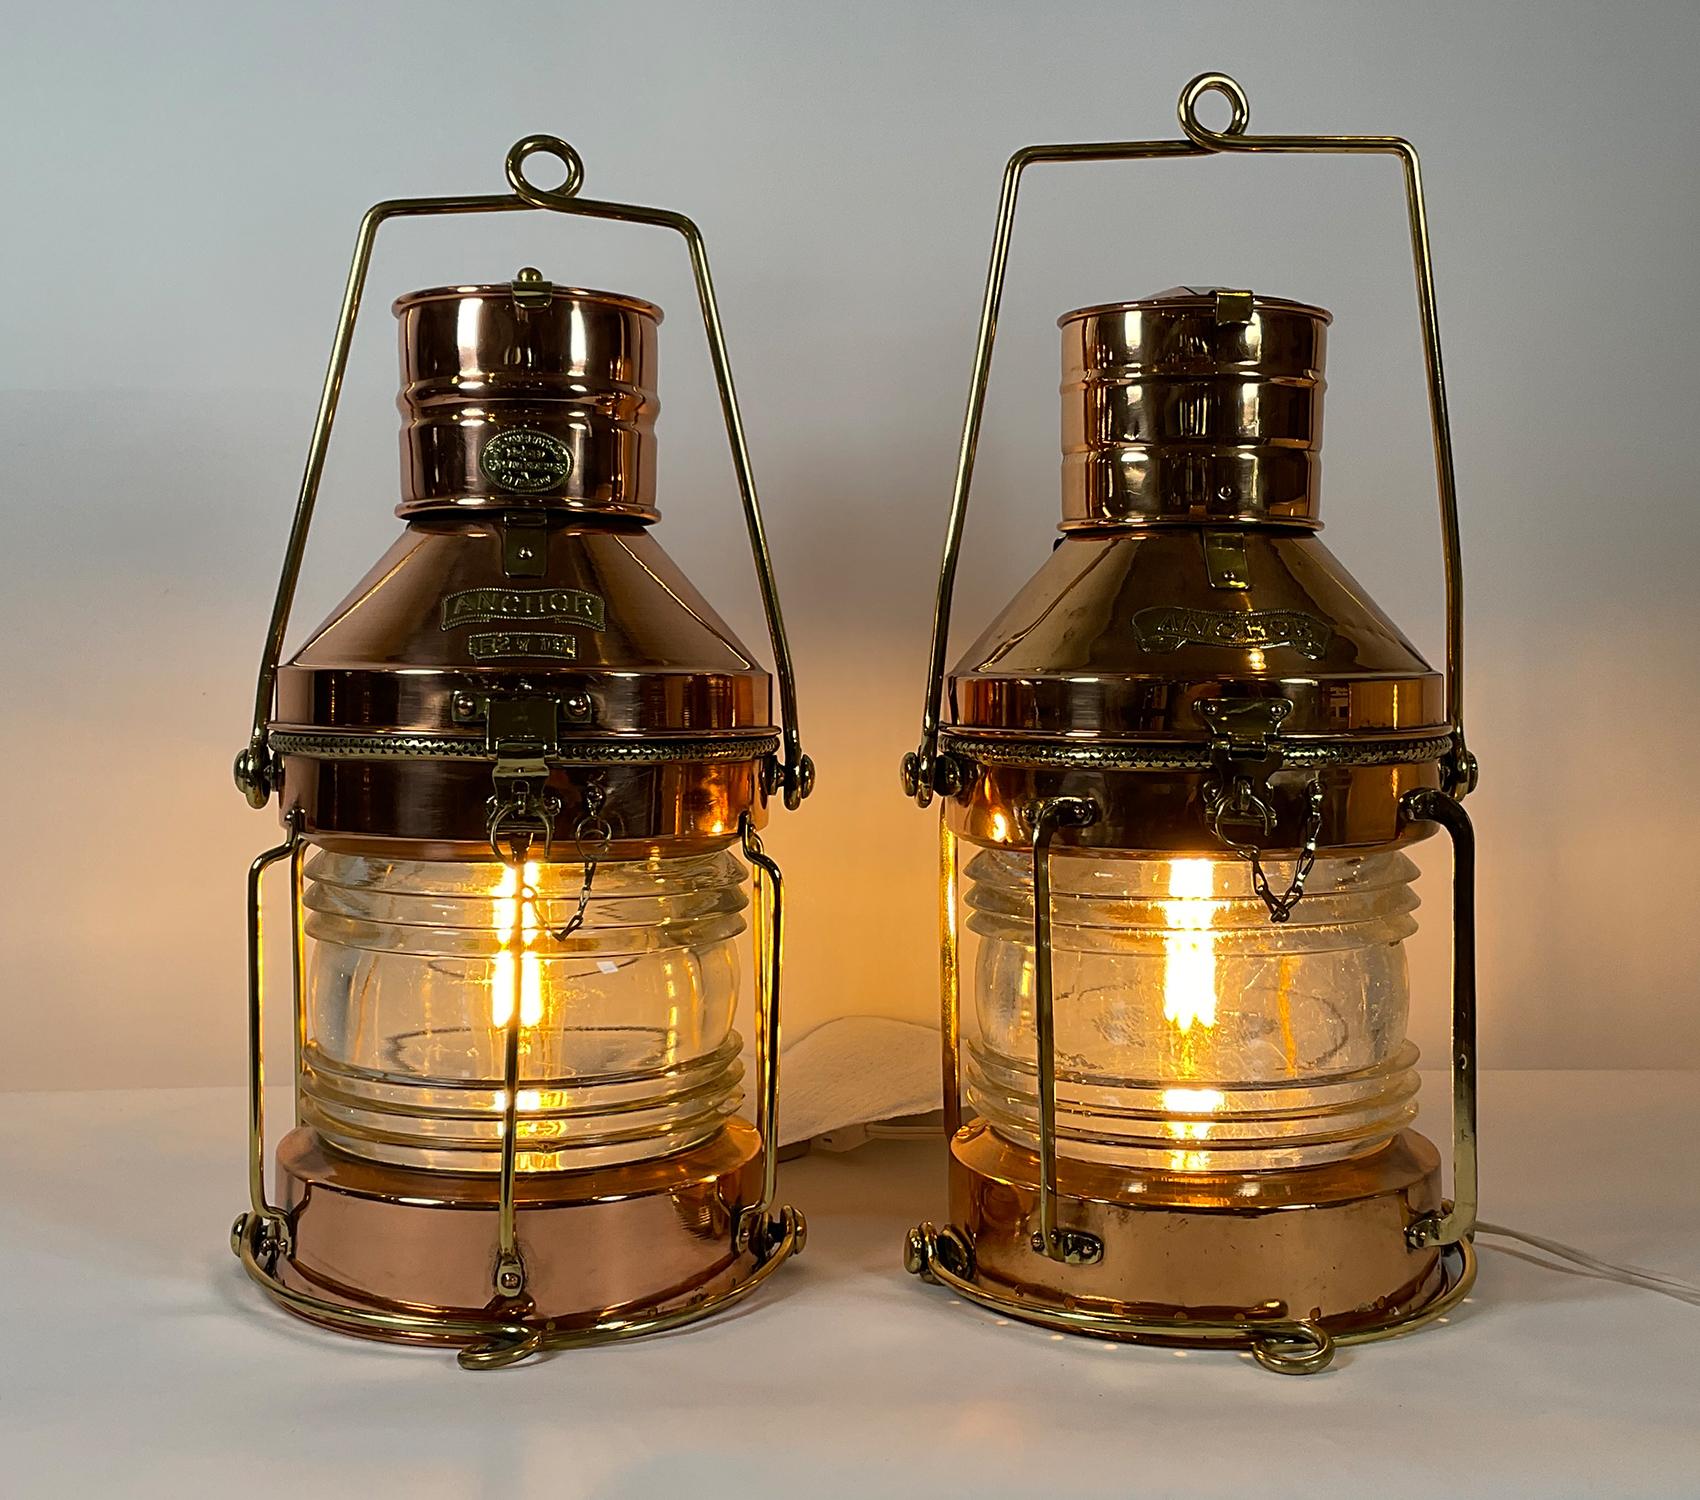 Here are two outstanding ship’s anchor lanterns. They are not a perfect “pair” but they are very closely matched. Both are antique ship’s lanterns with copper housings, brass trim, brass “anchor” badges, one with badge from R.C. Murray Limited, 37